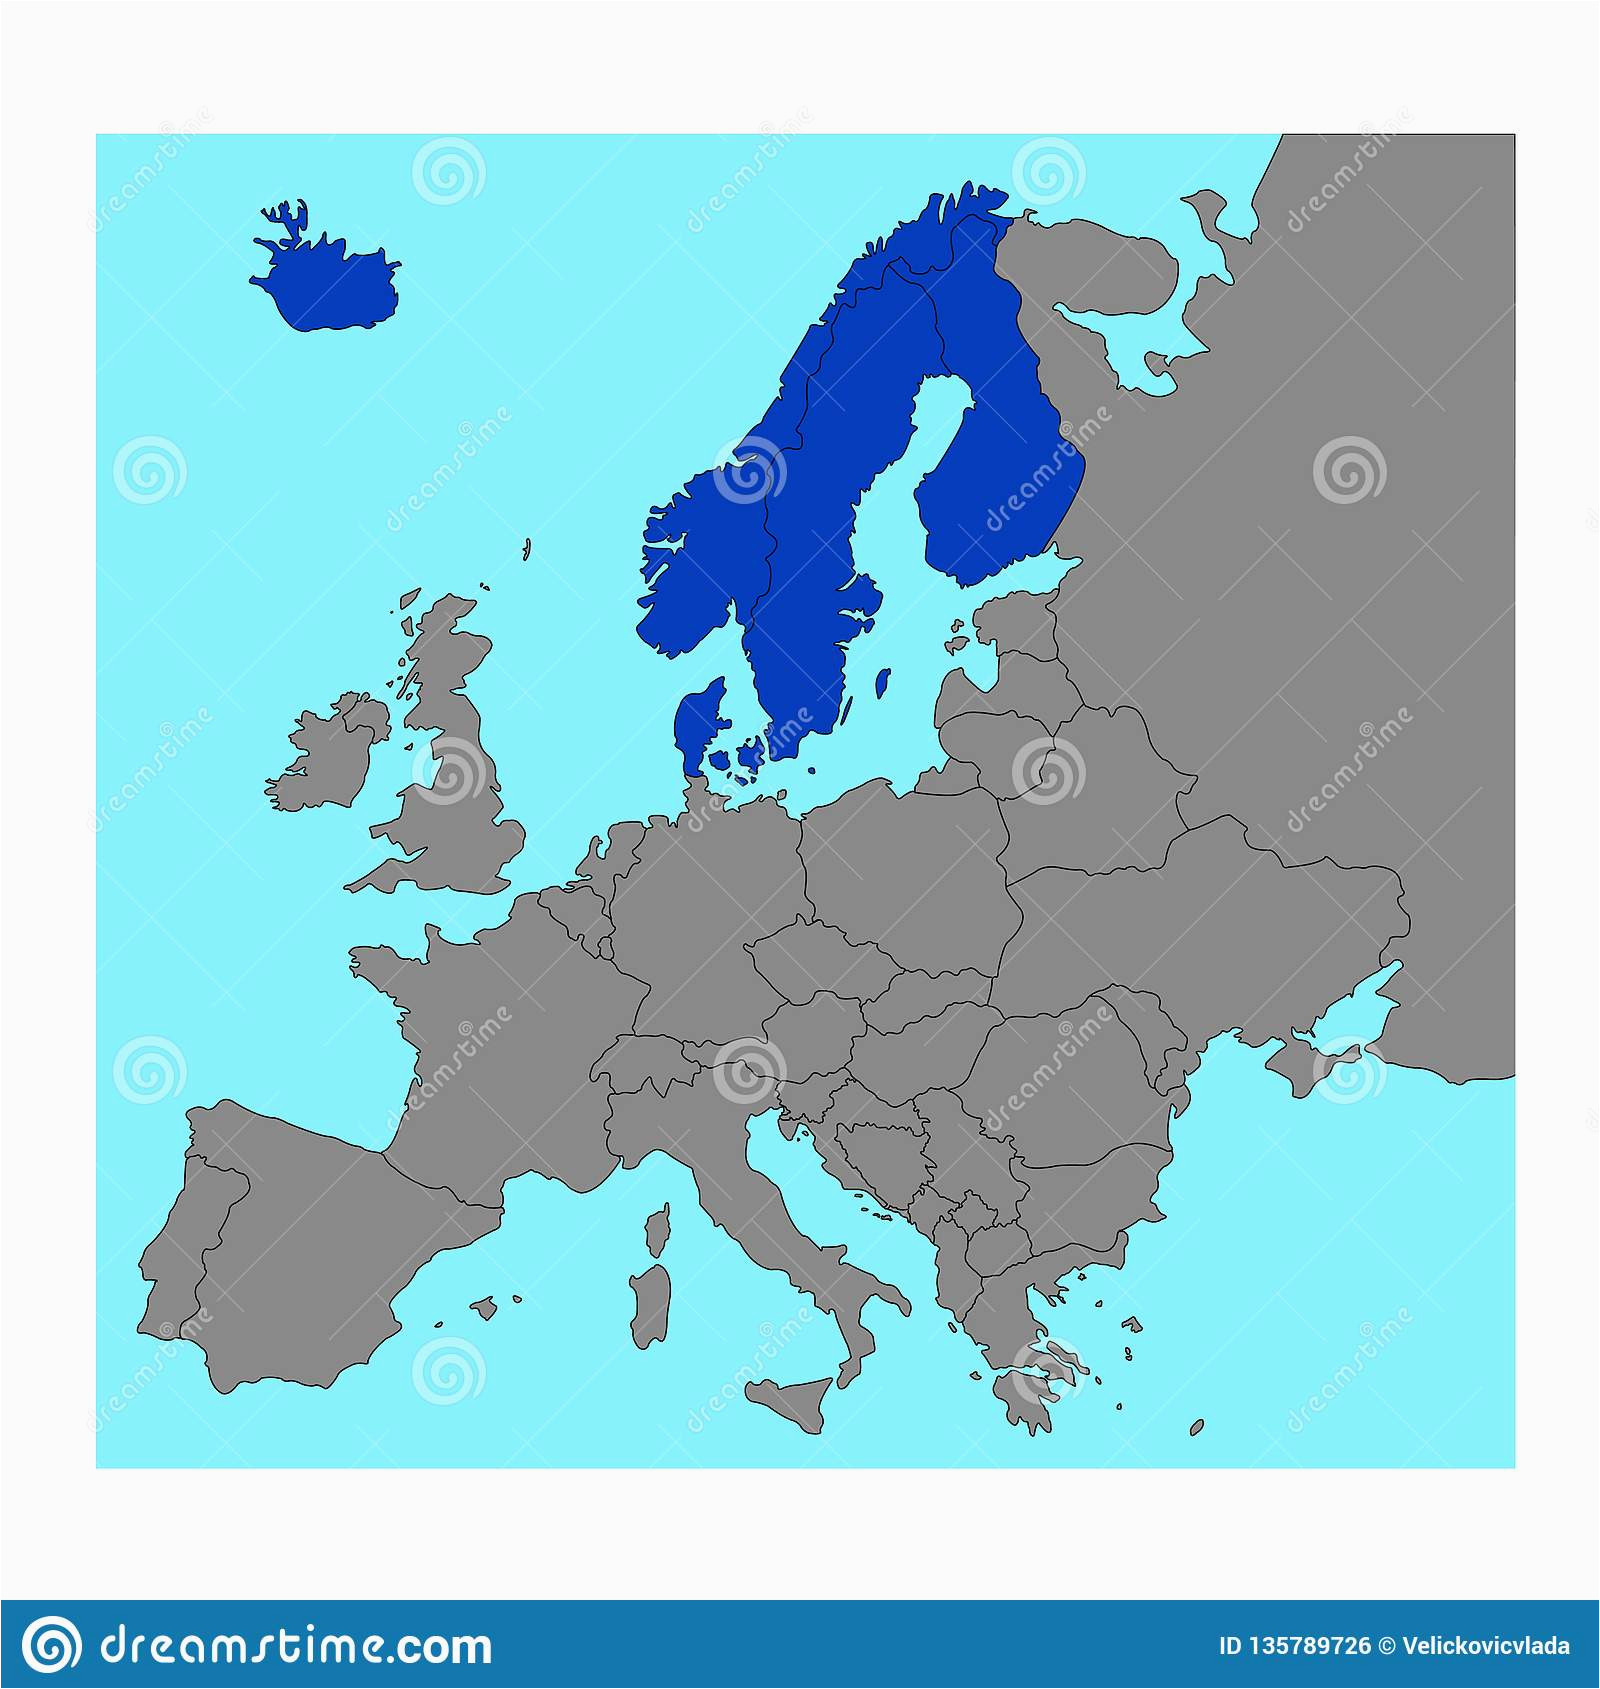 northern europe countries map region of the european